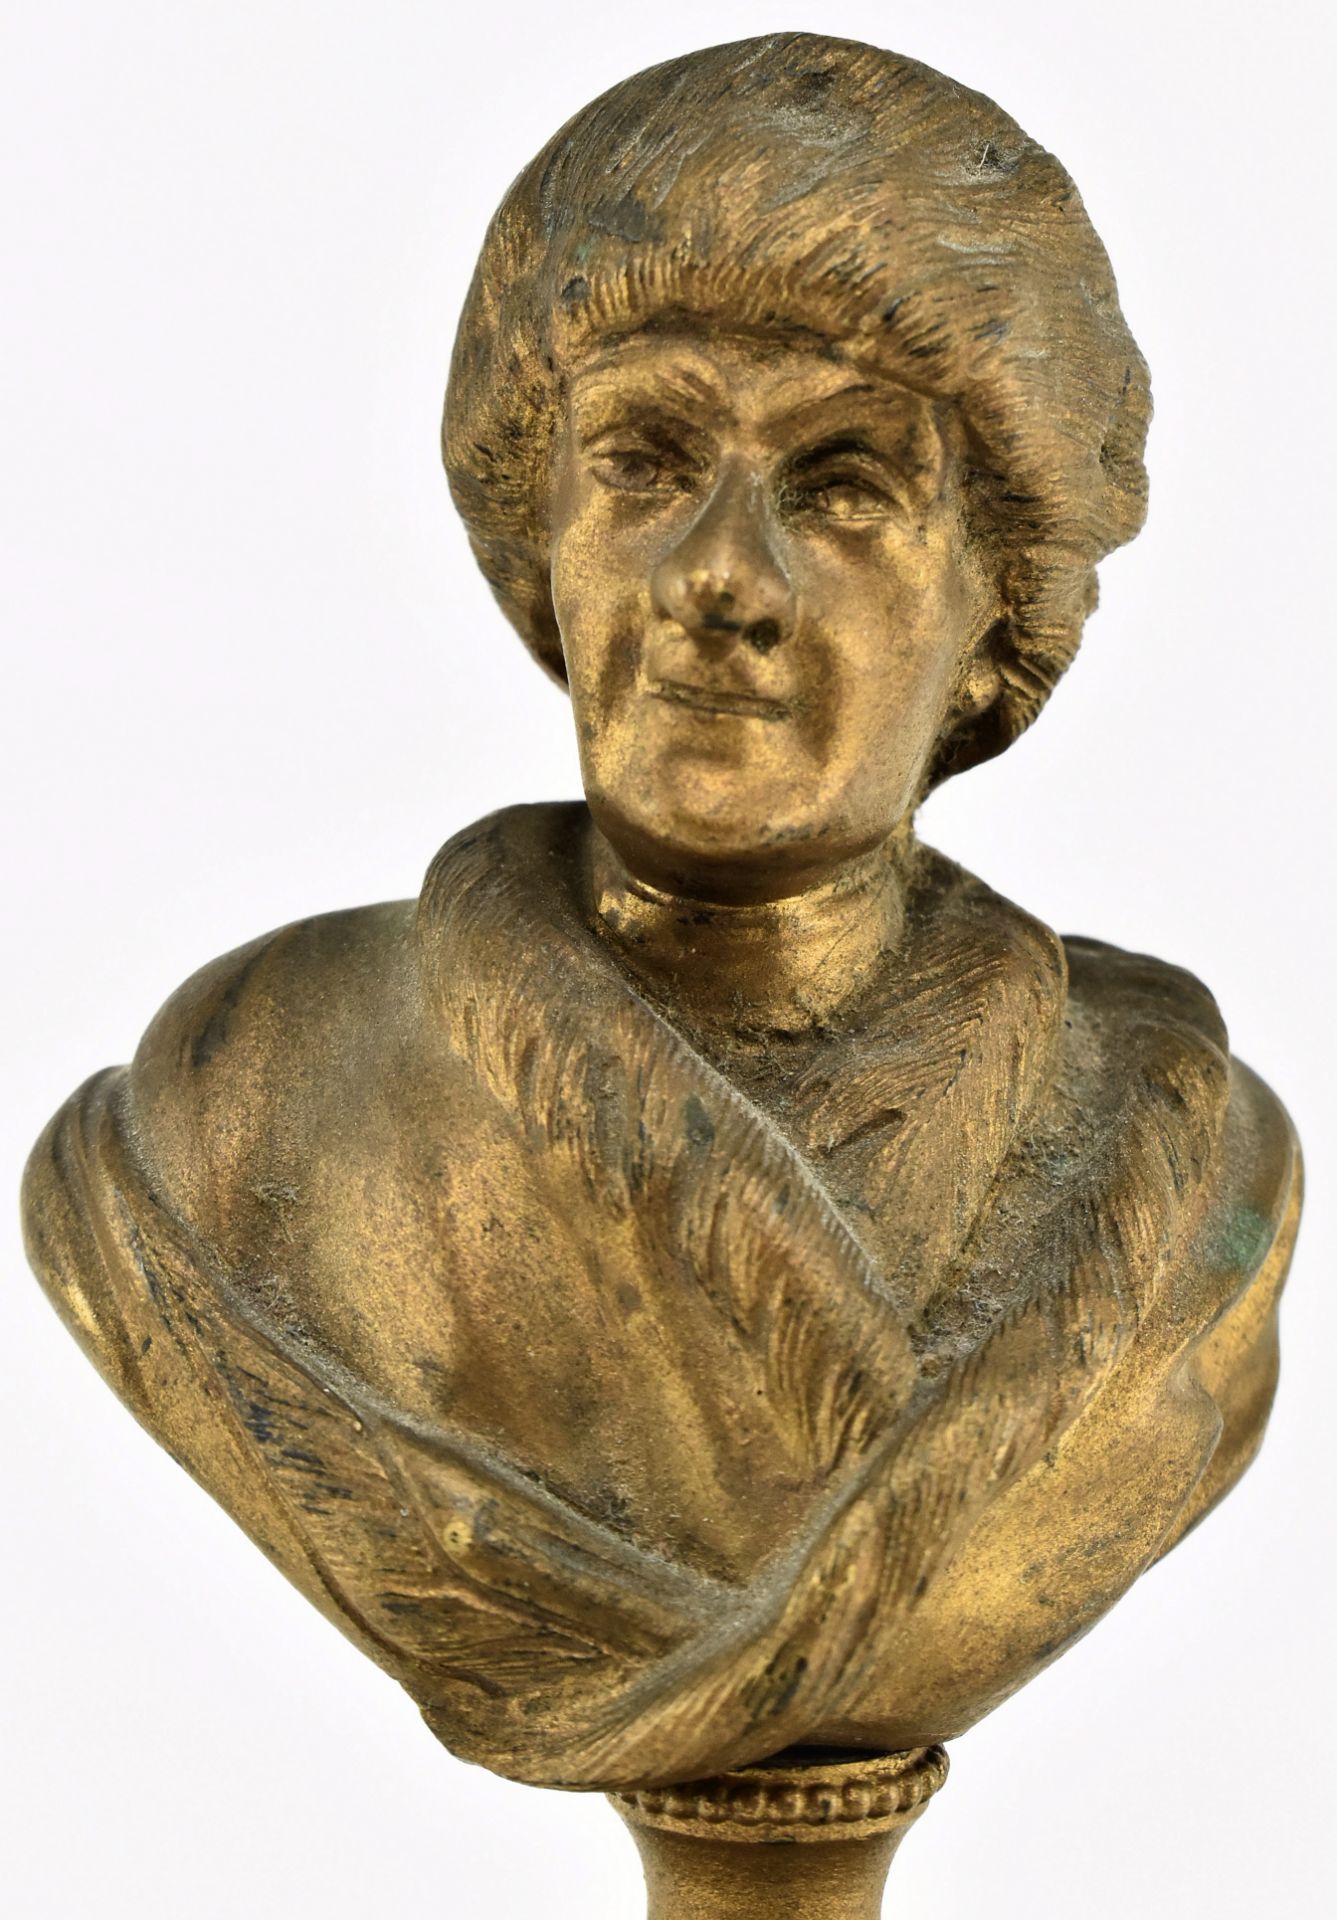 19H CENTURY FRENCH BRONZE BUST OF ROUSSEAU - Image 5 of 5